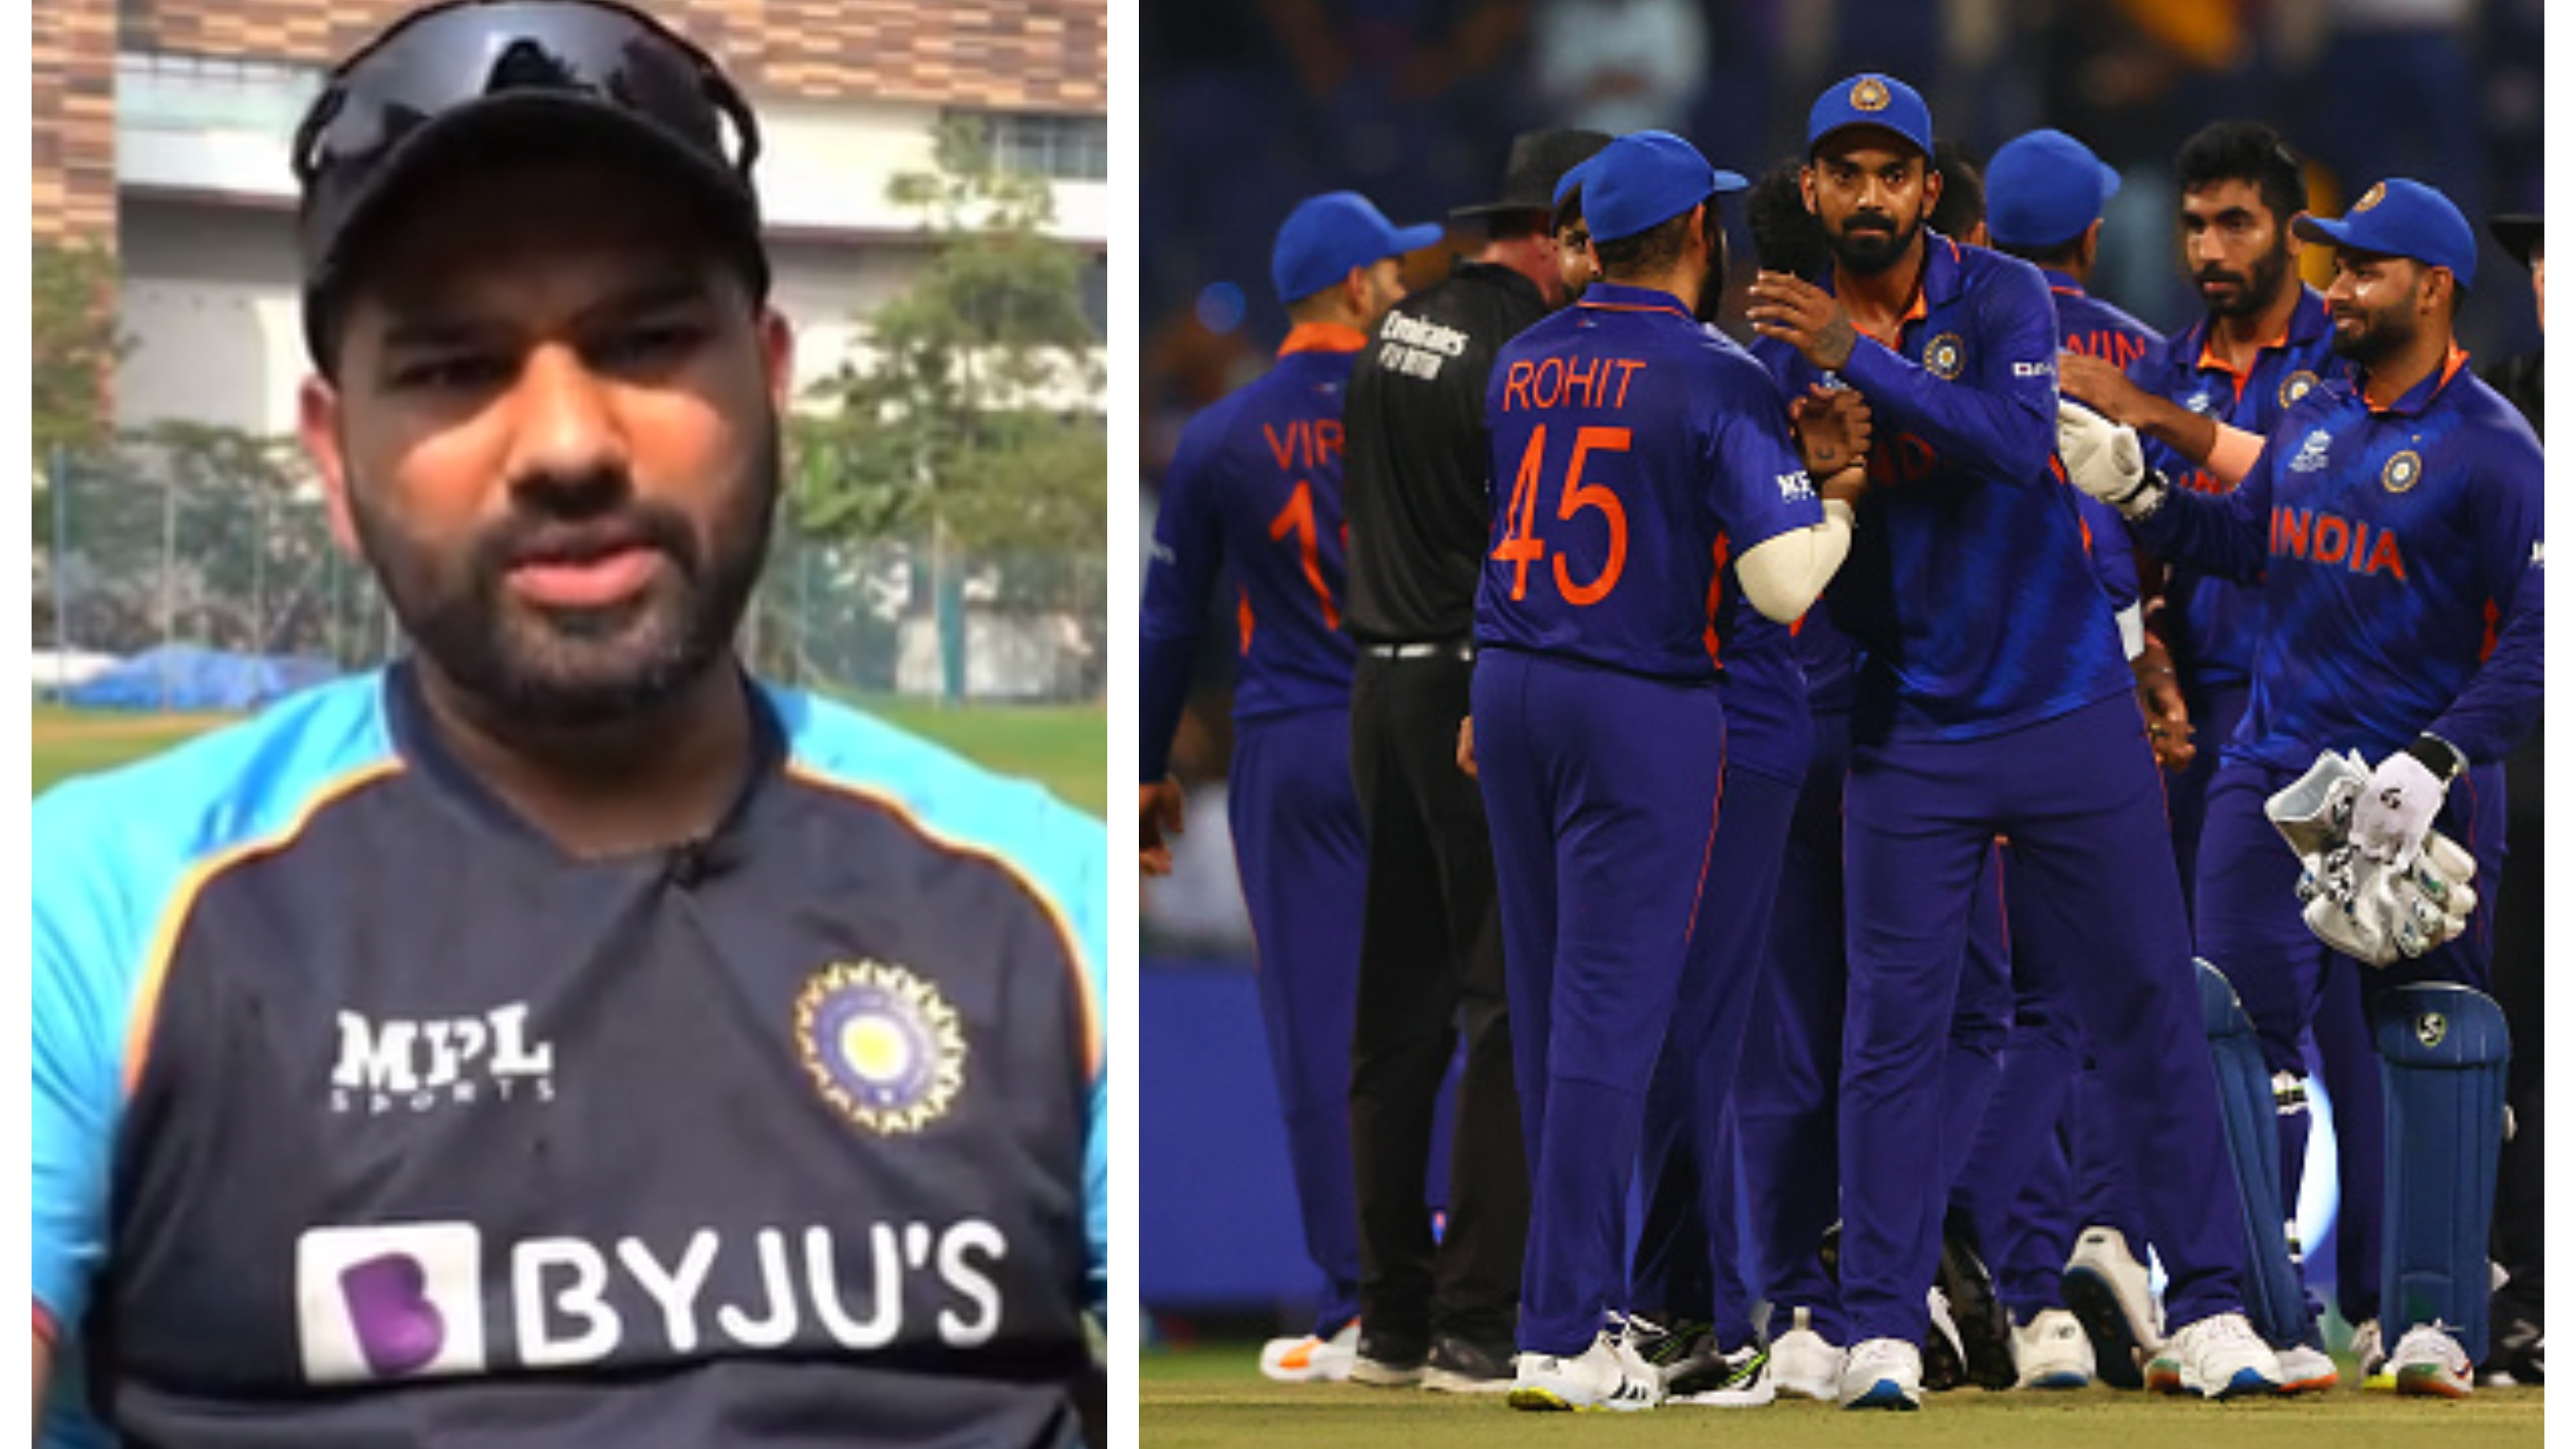 WATCH: ‘Want to create a strong bond between players’, says India’s new white-ball skipper Rohit Sharma